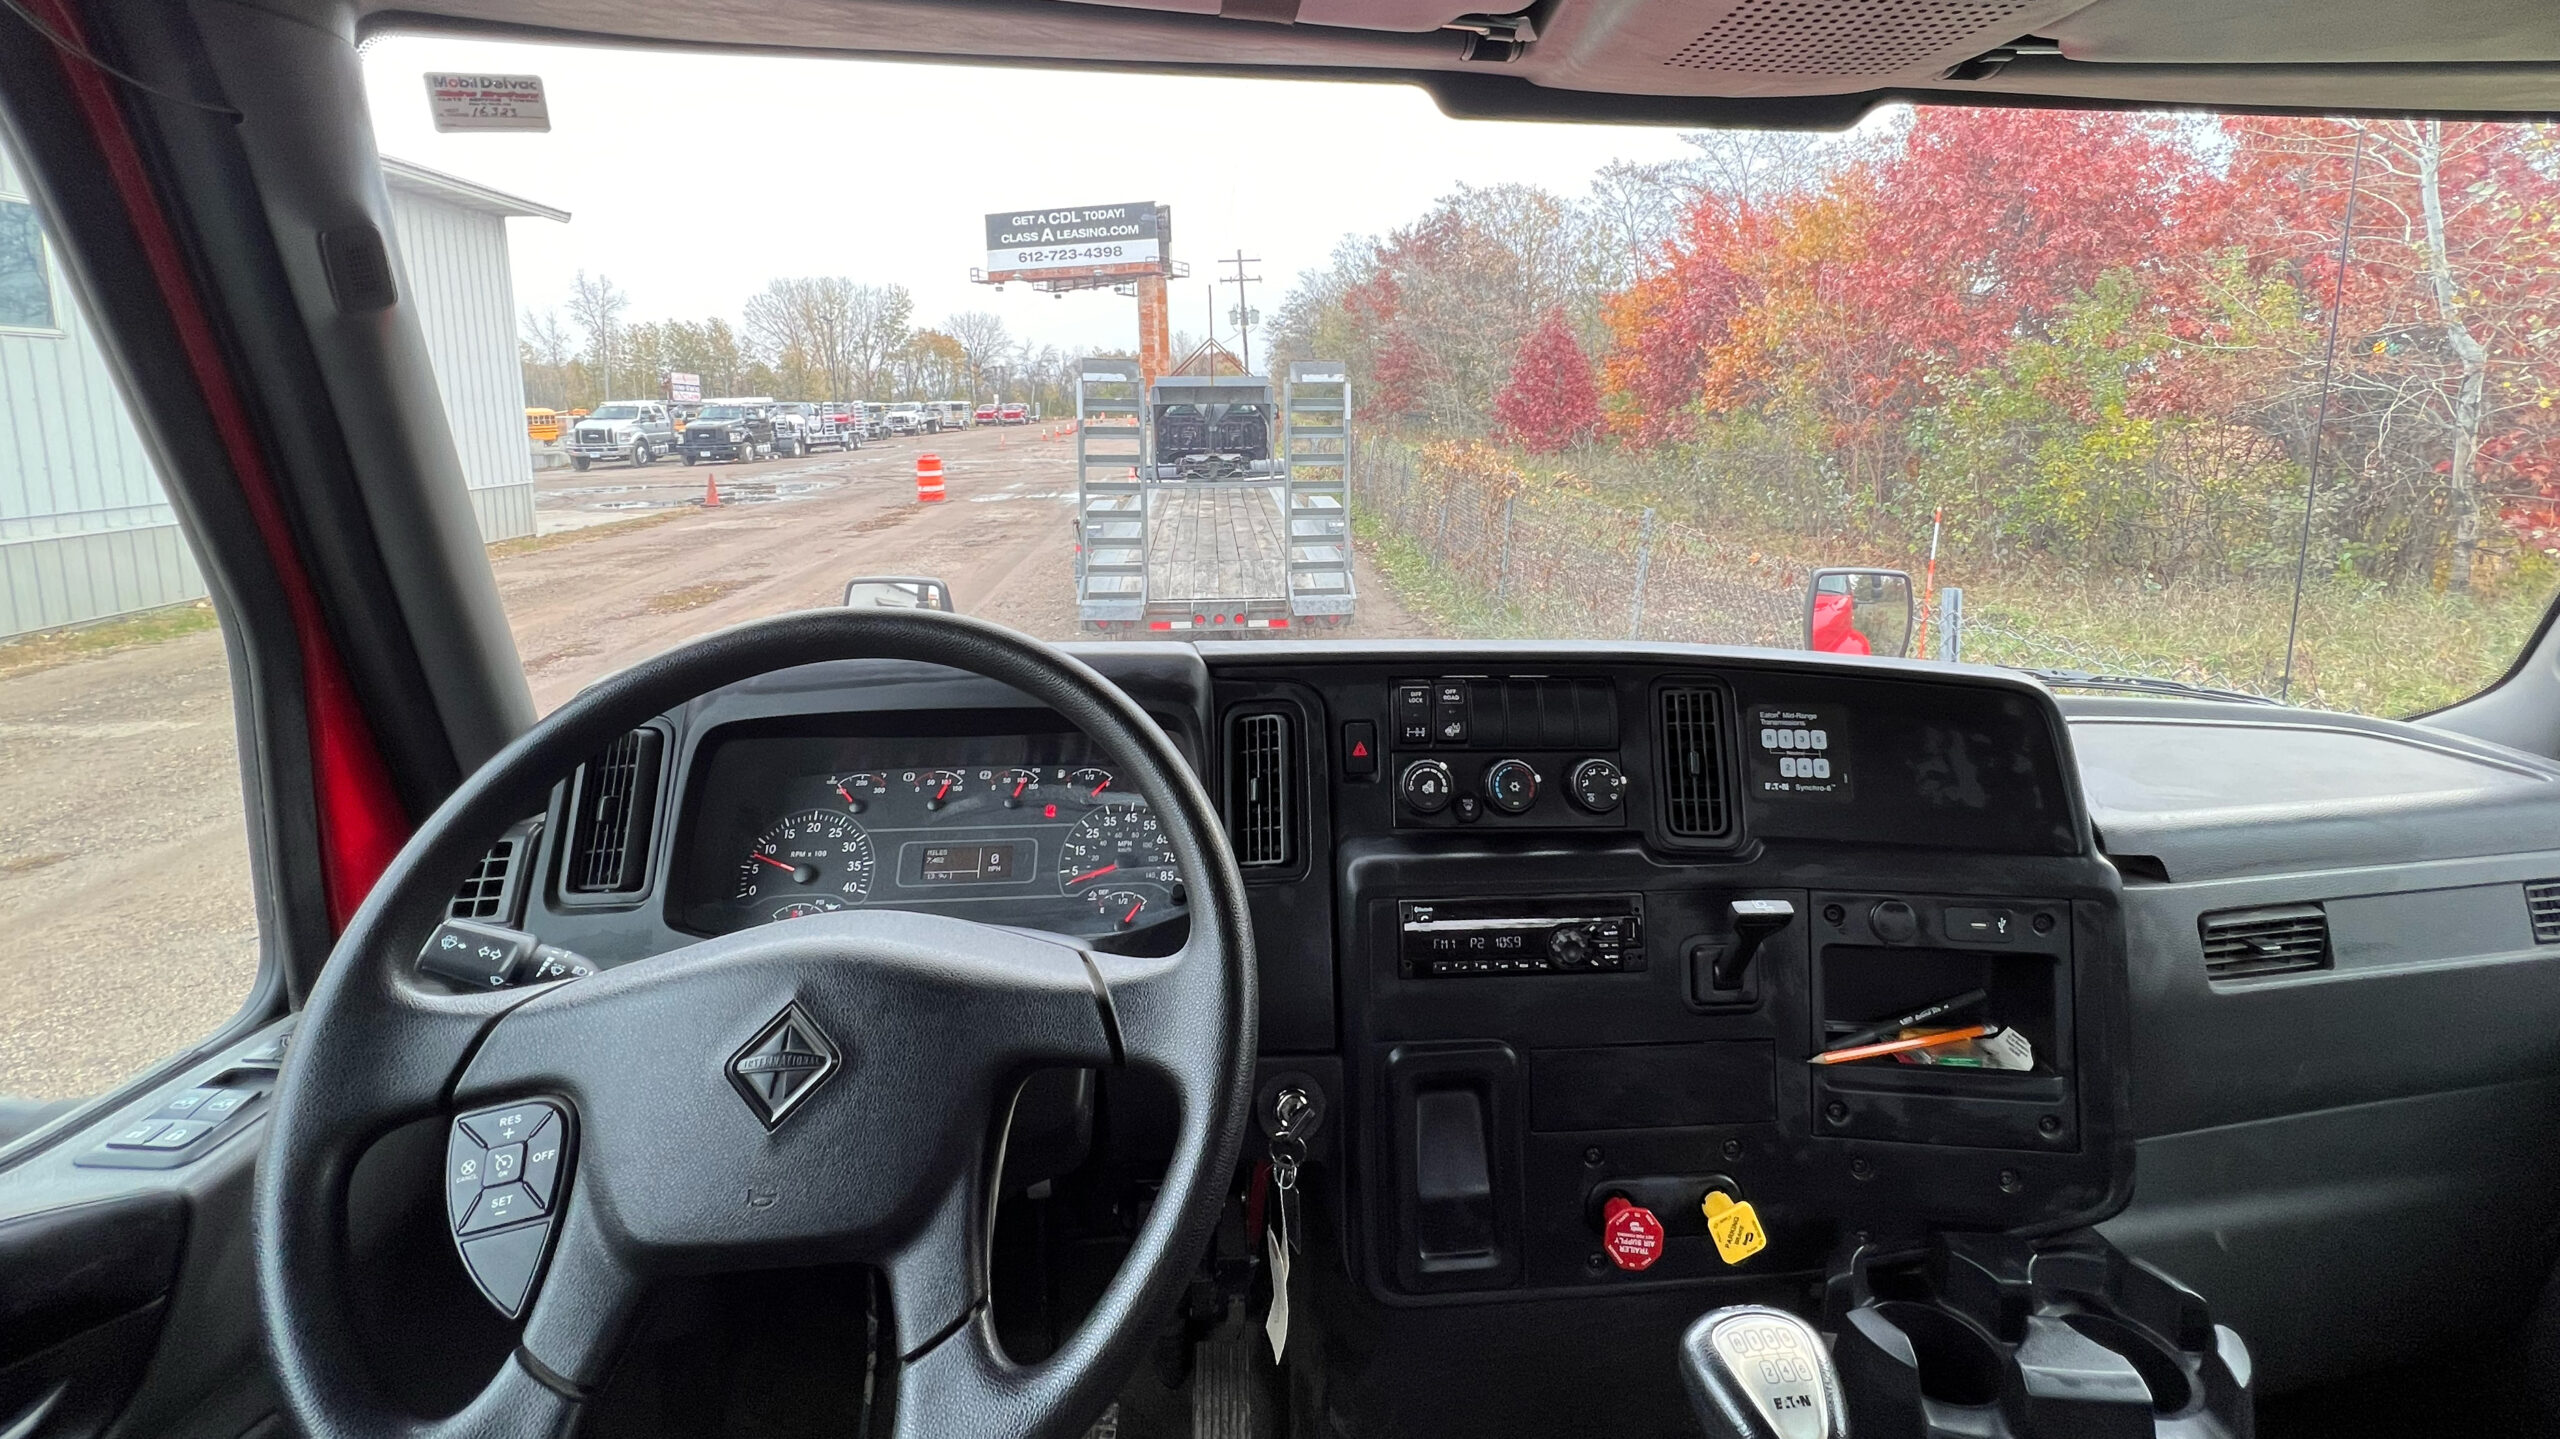 Behind the wheel training to get your CDL in Minnesota